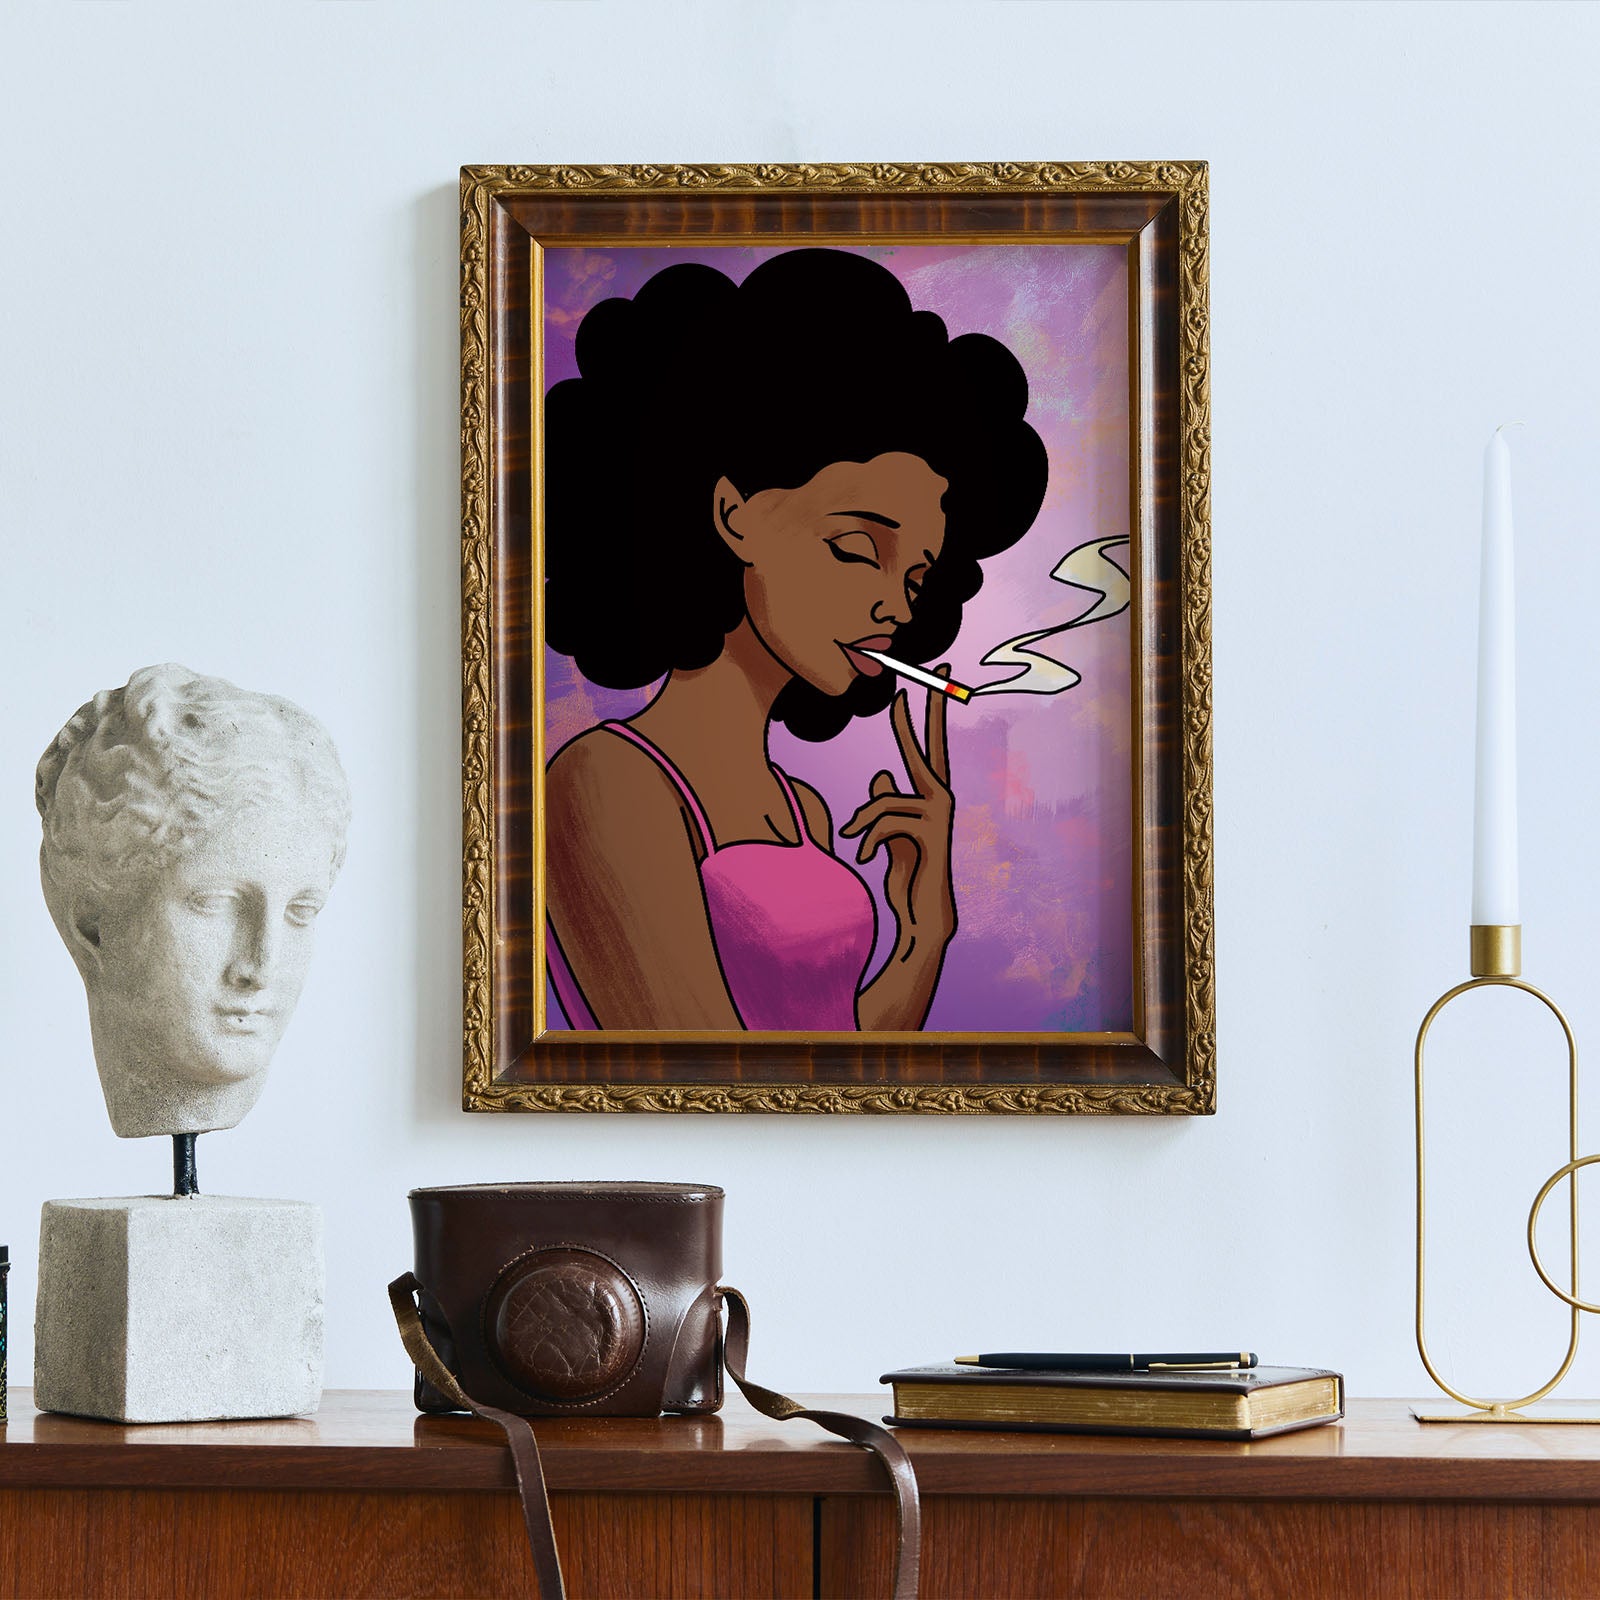 Paint & Sip/ Pre Drawn/ DIY Paint Party/canvas/adult Painting/ Paint and  Sip at Home Kit Black Woman With Afro in White Dress 